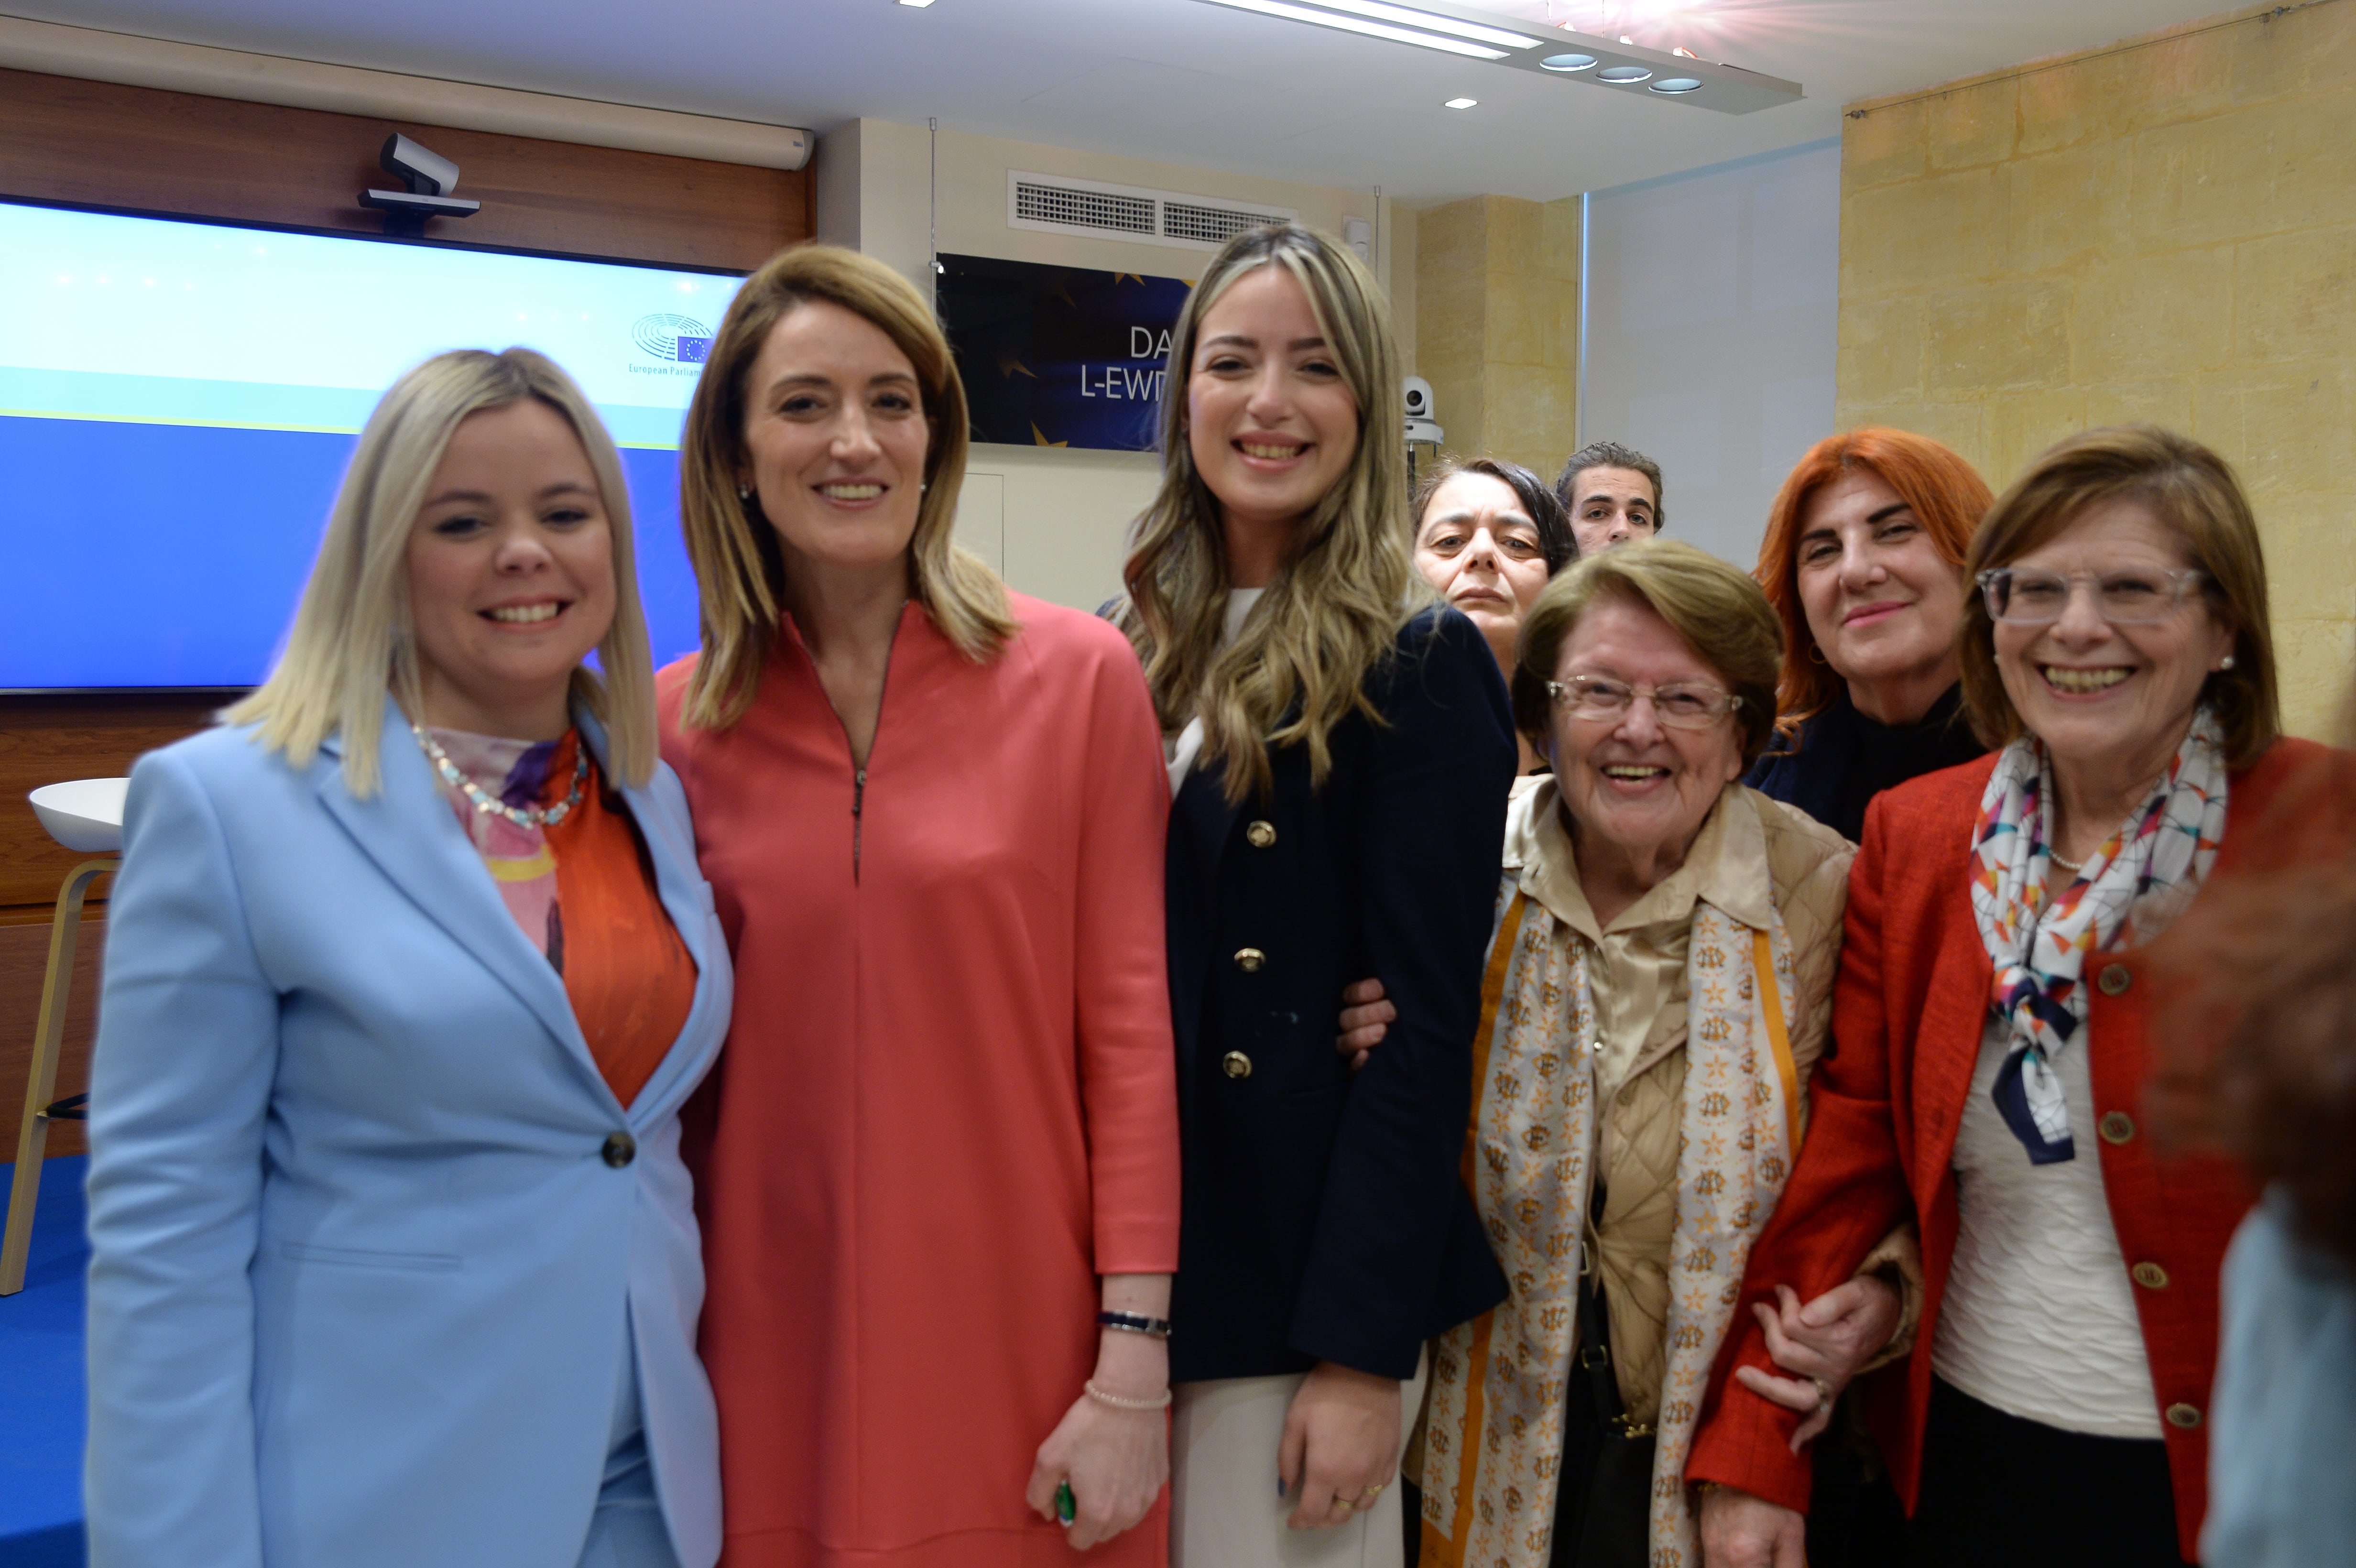 President Metsola with women in the audience at the International Women's Day event